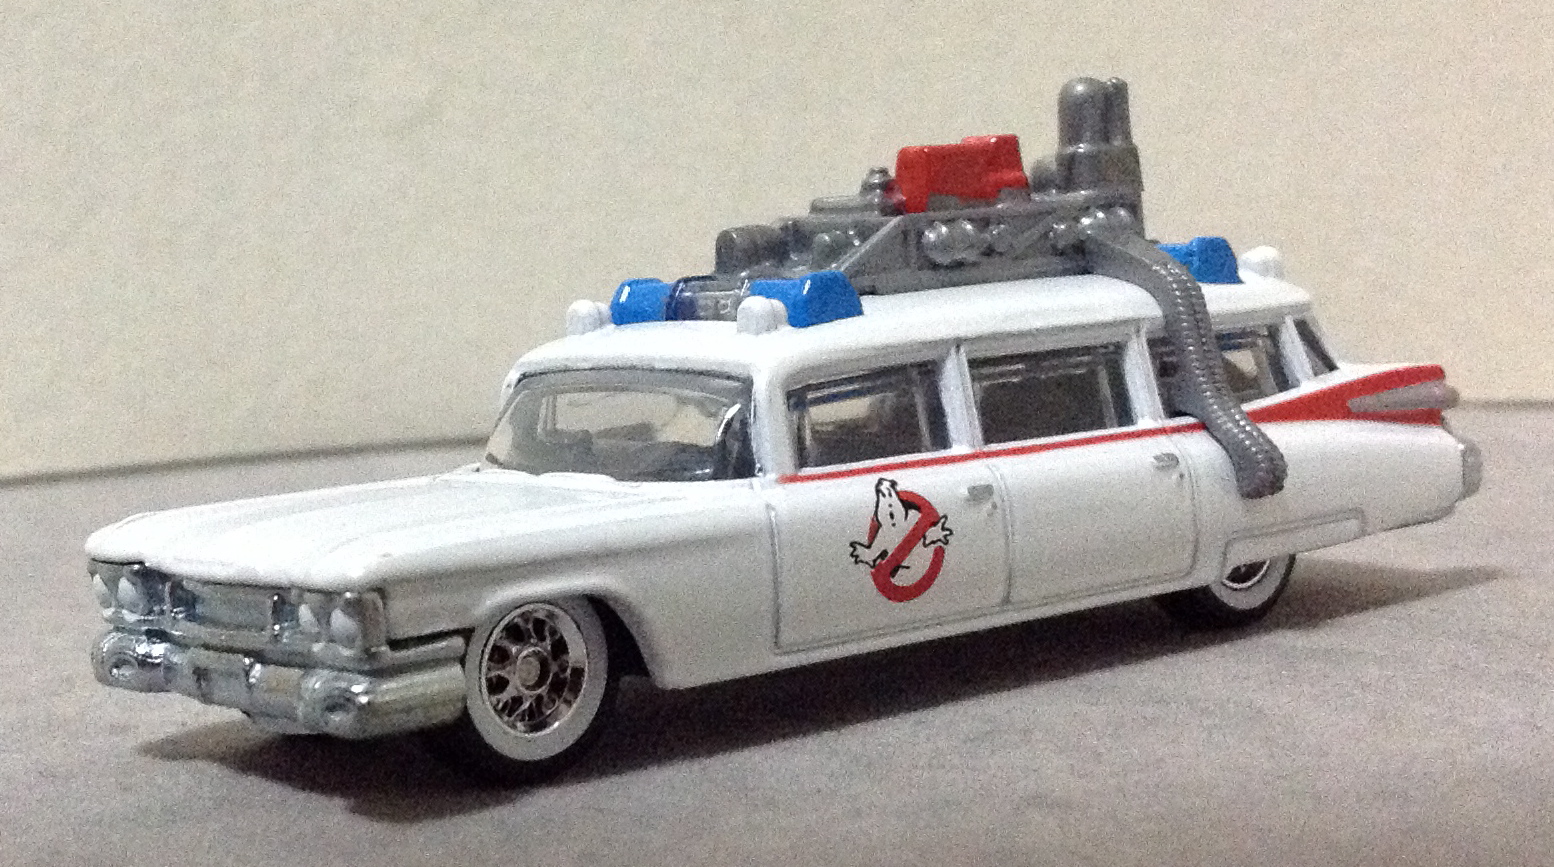 Hot Wheels Ghostbusters Ecto-1  2010 Serie Ovp 